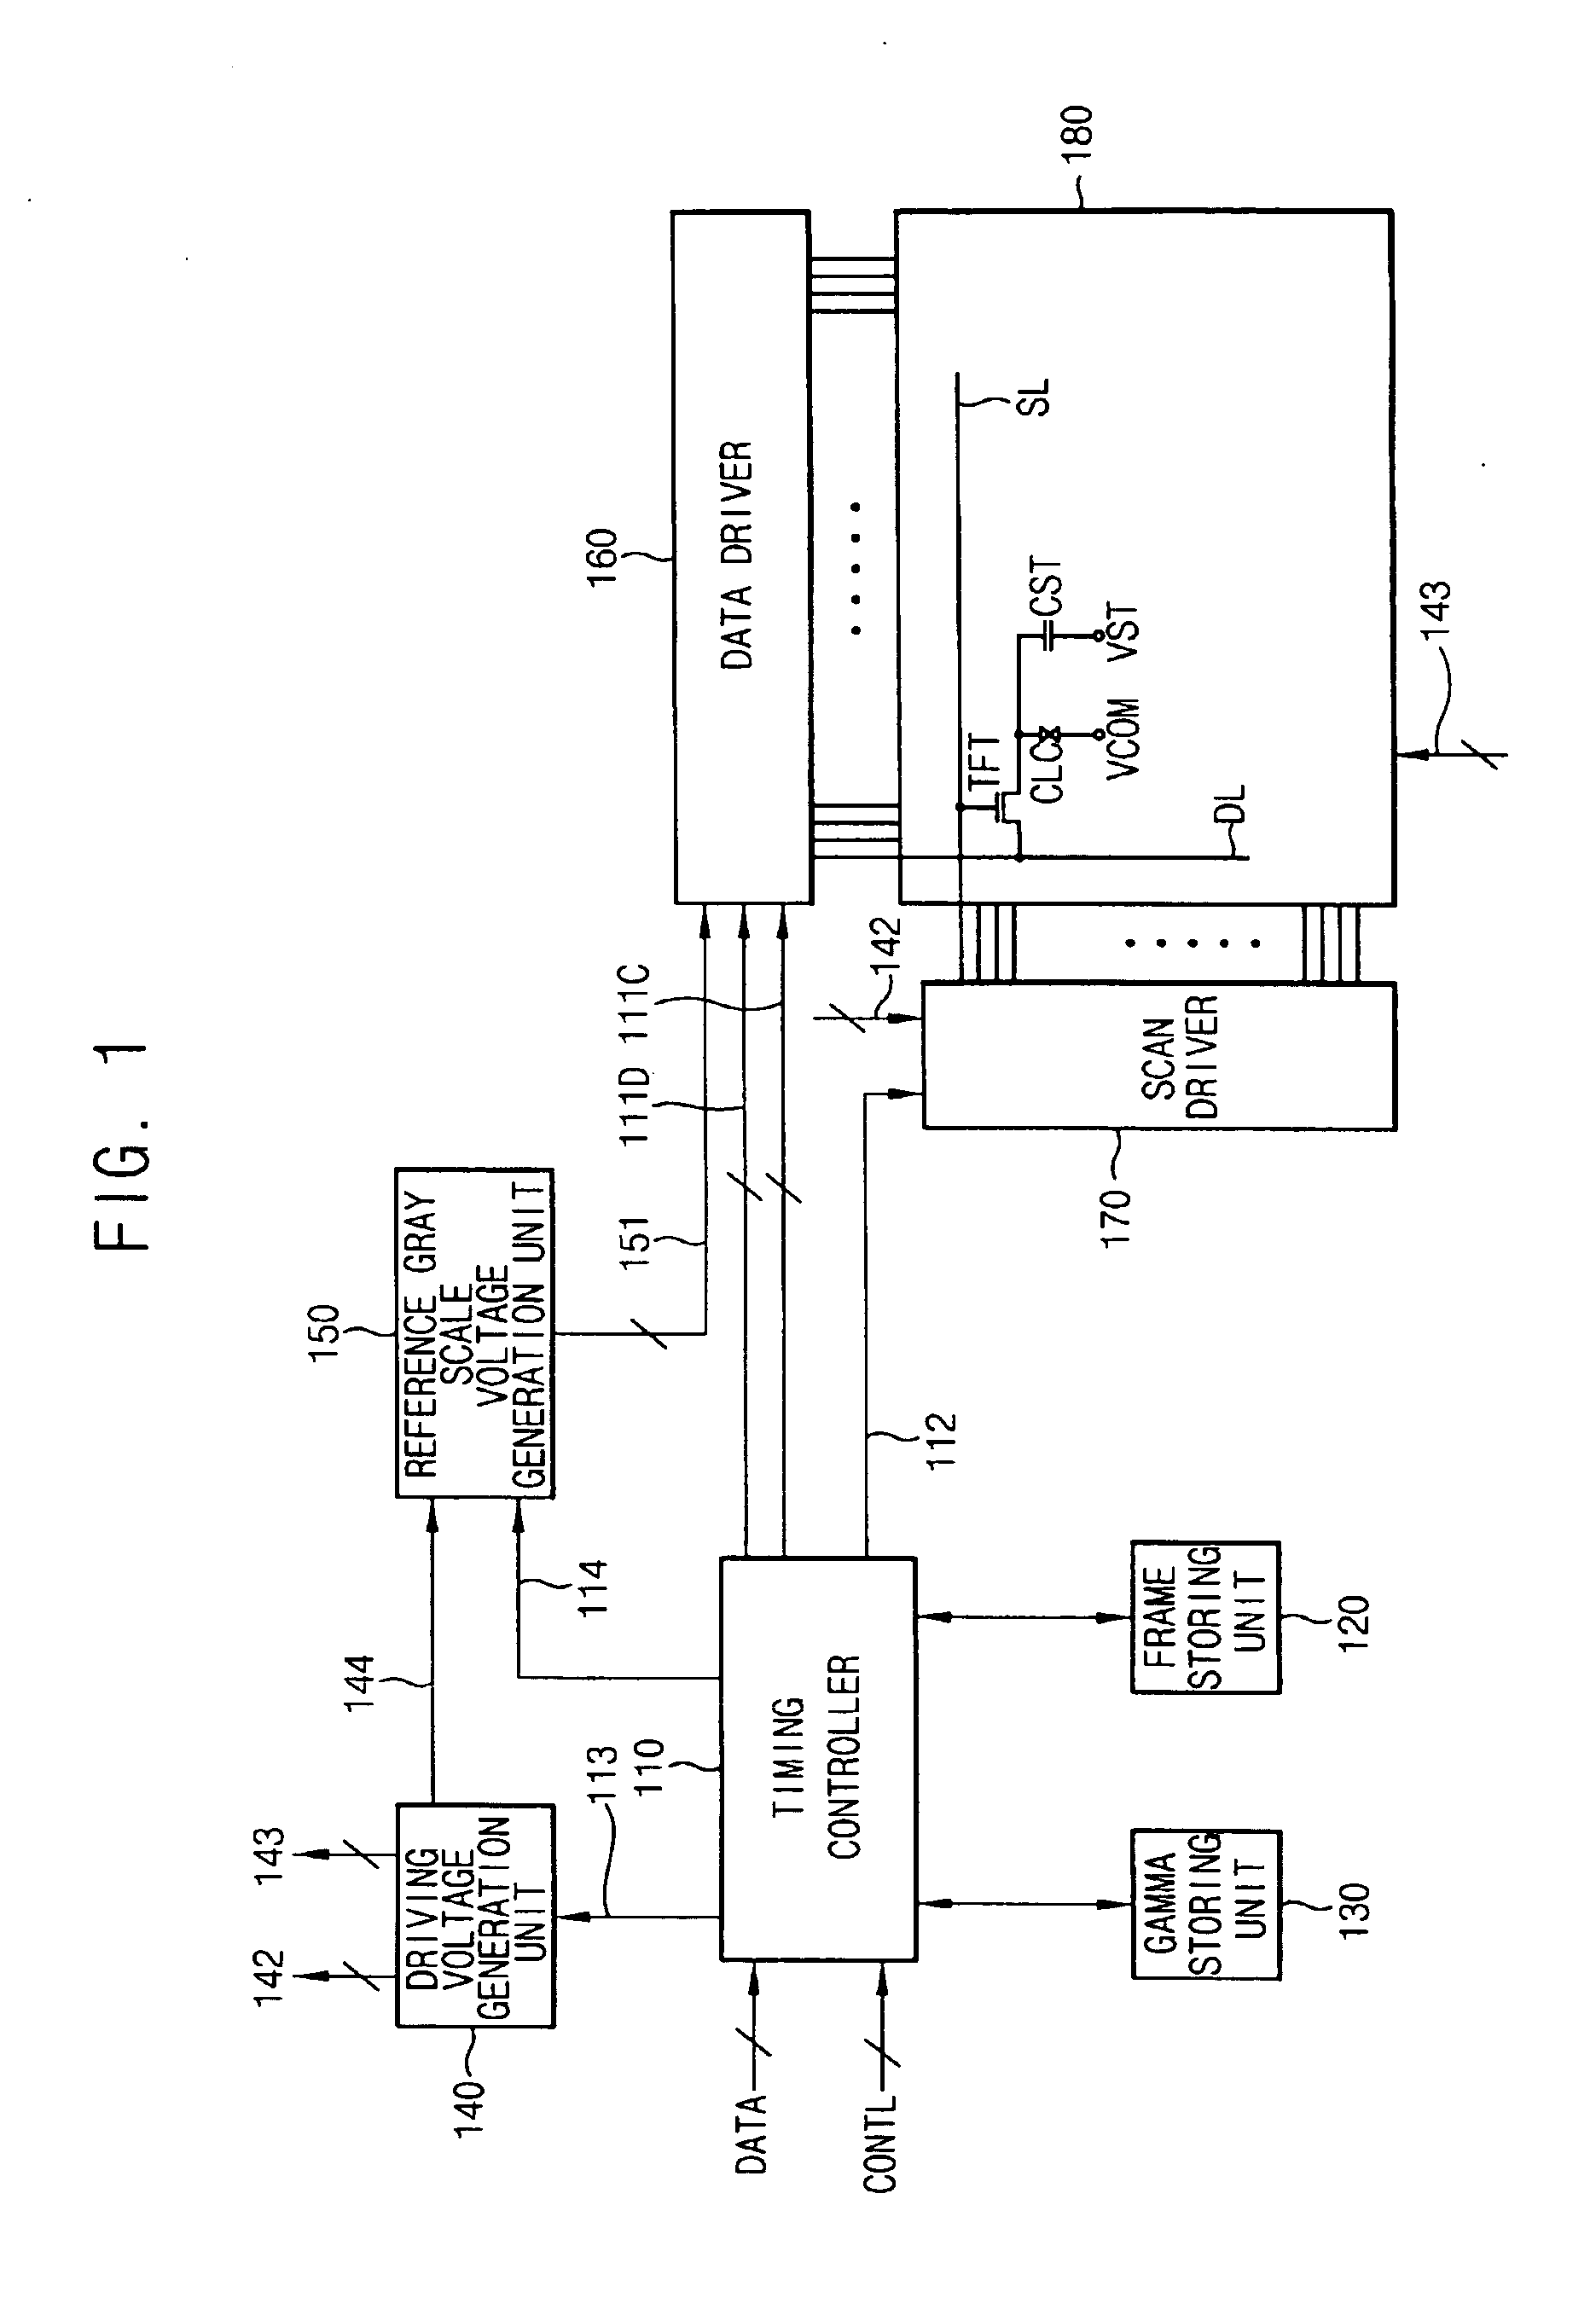 Display device, apparatus for driving the same and method of driving the same